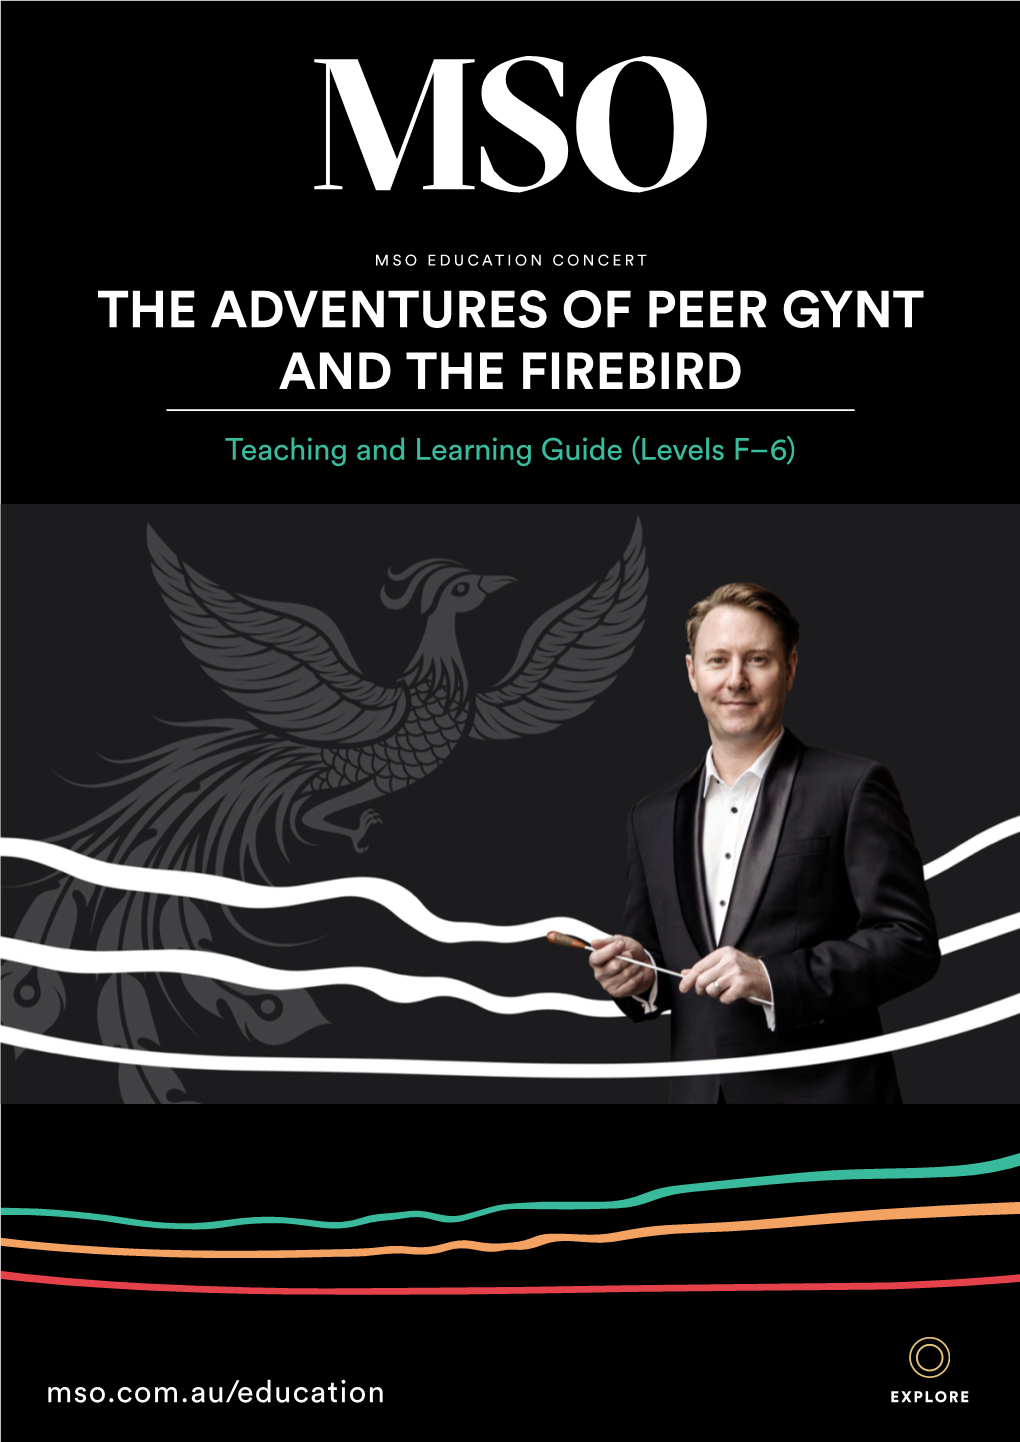 The Adventures of Peer Gynt and the Firebird